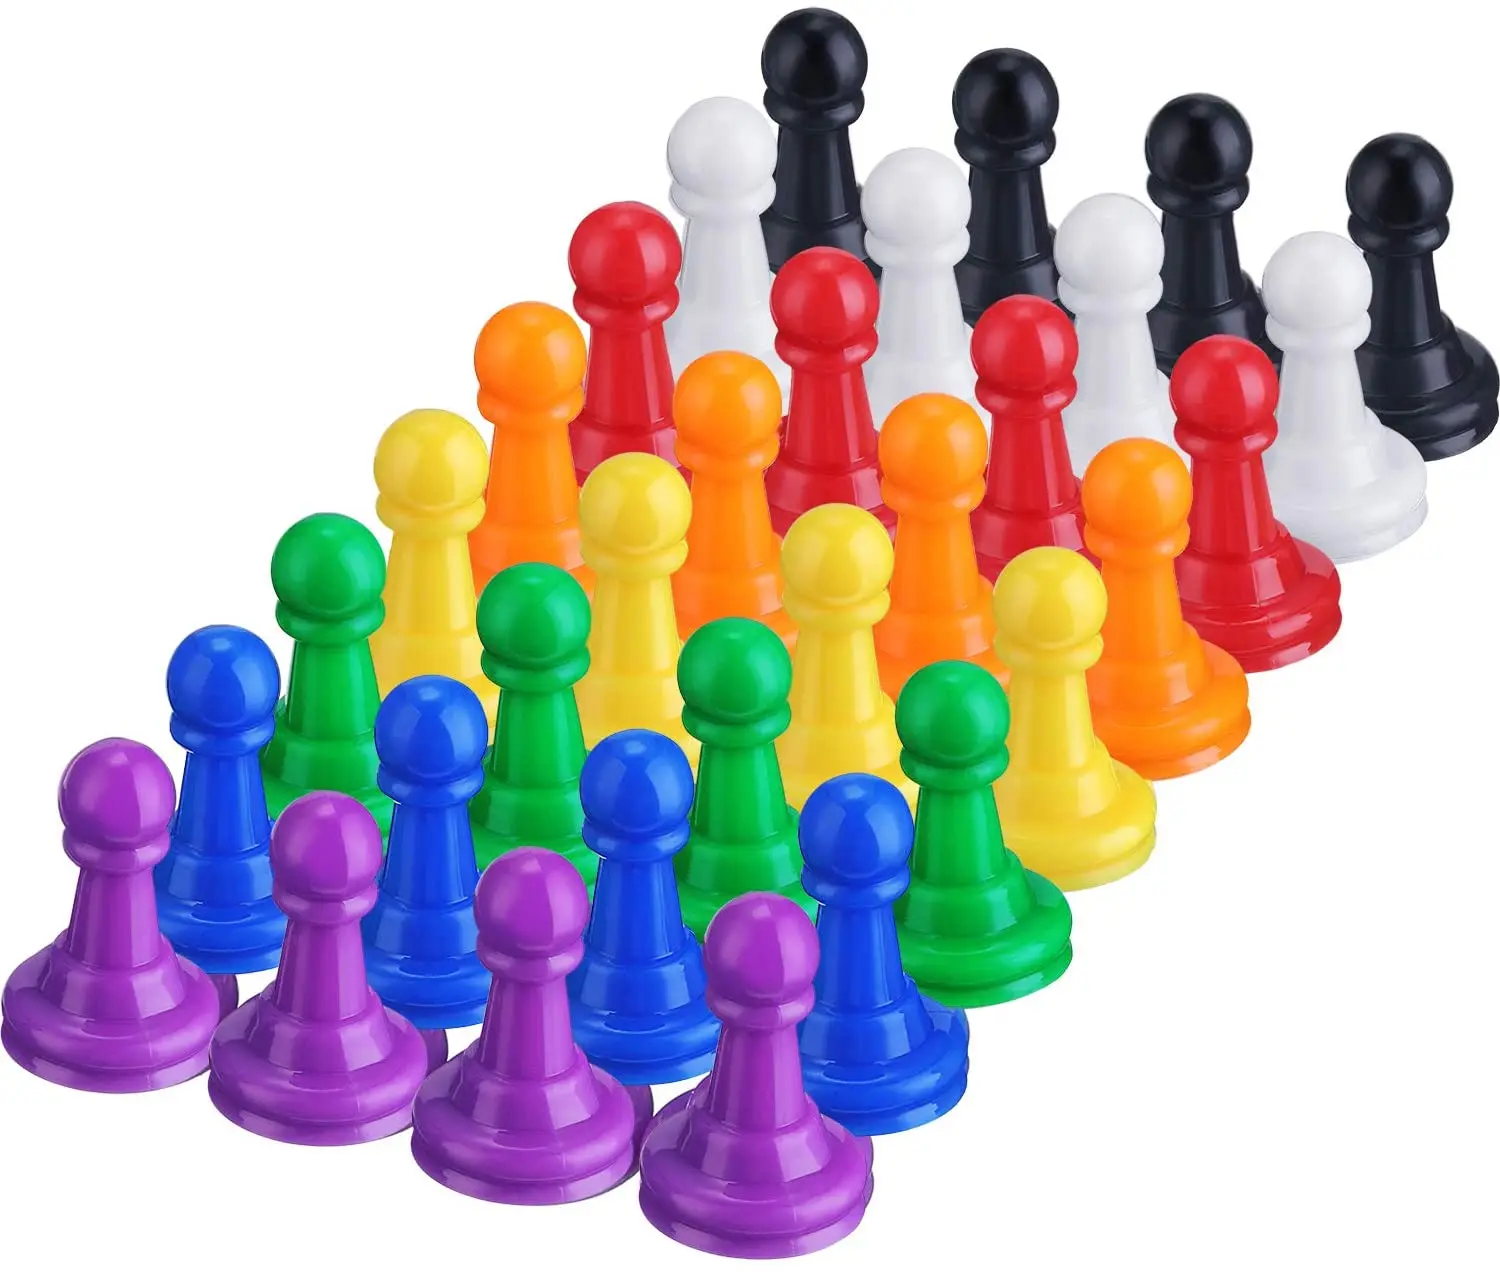 100 Peeples Bulk Components 24mm Plastic Game Piece Tokens in 10 Colors 